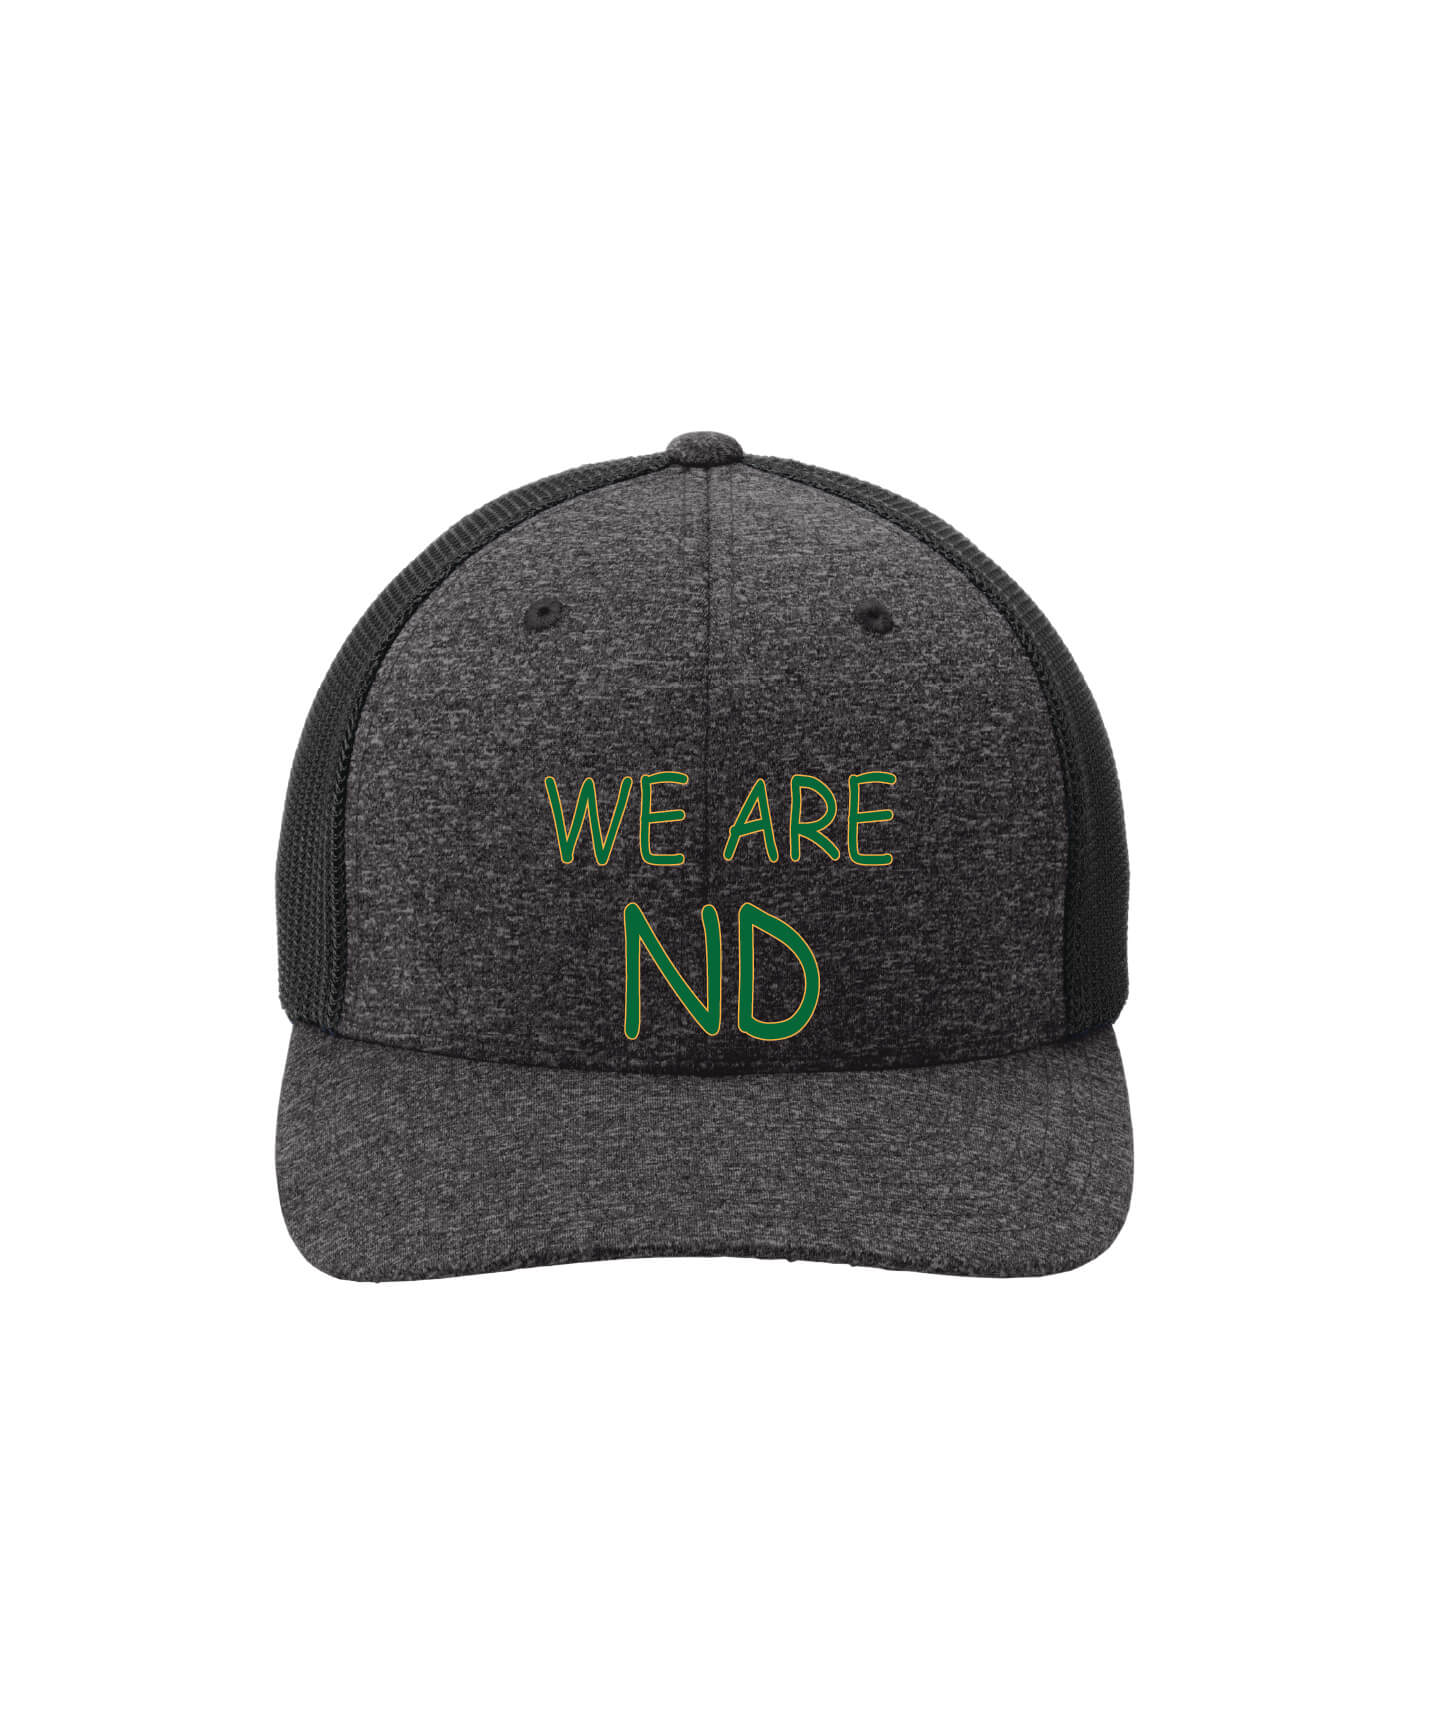 Mesh Back Trucker Cap We Are ND